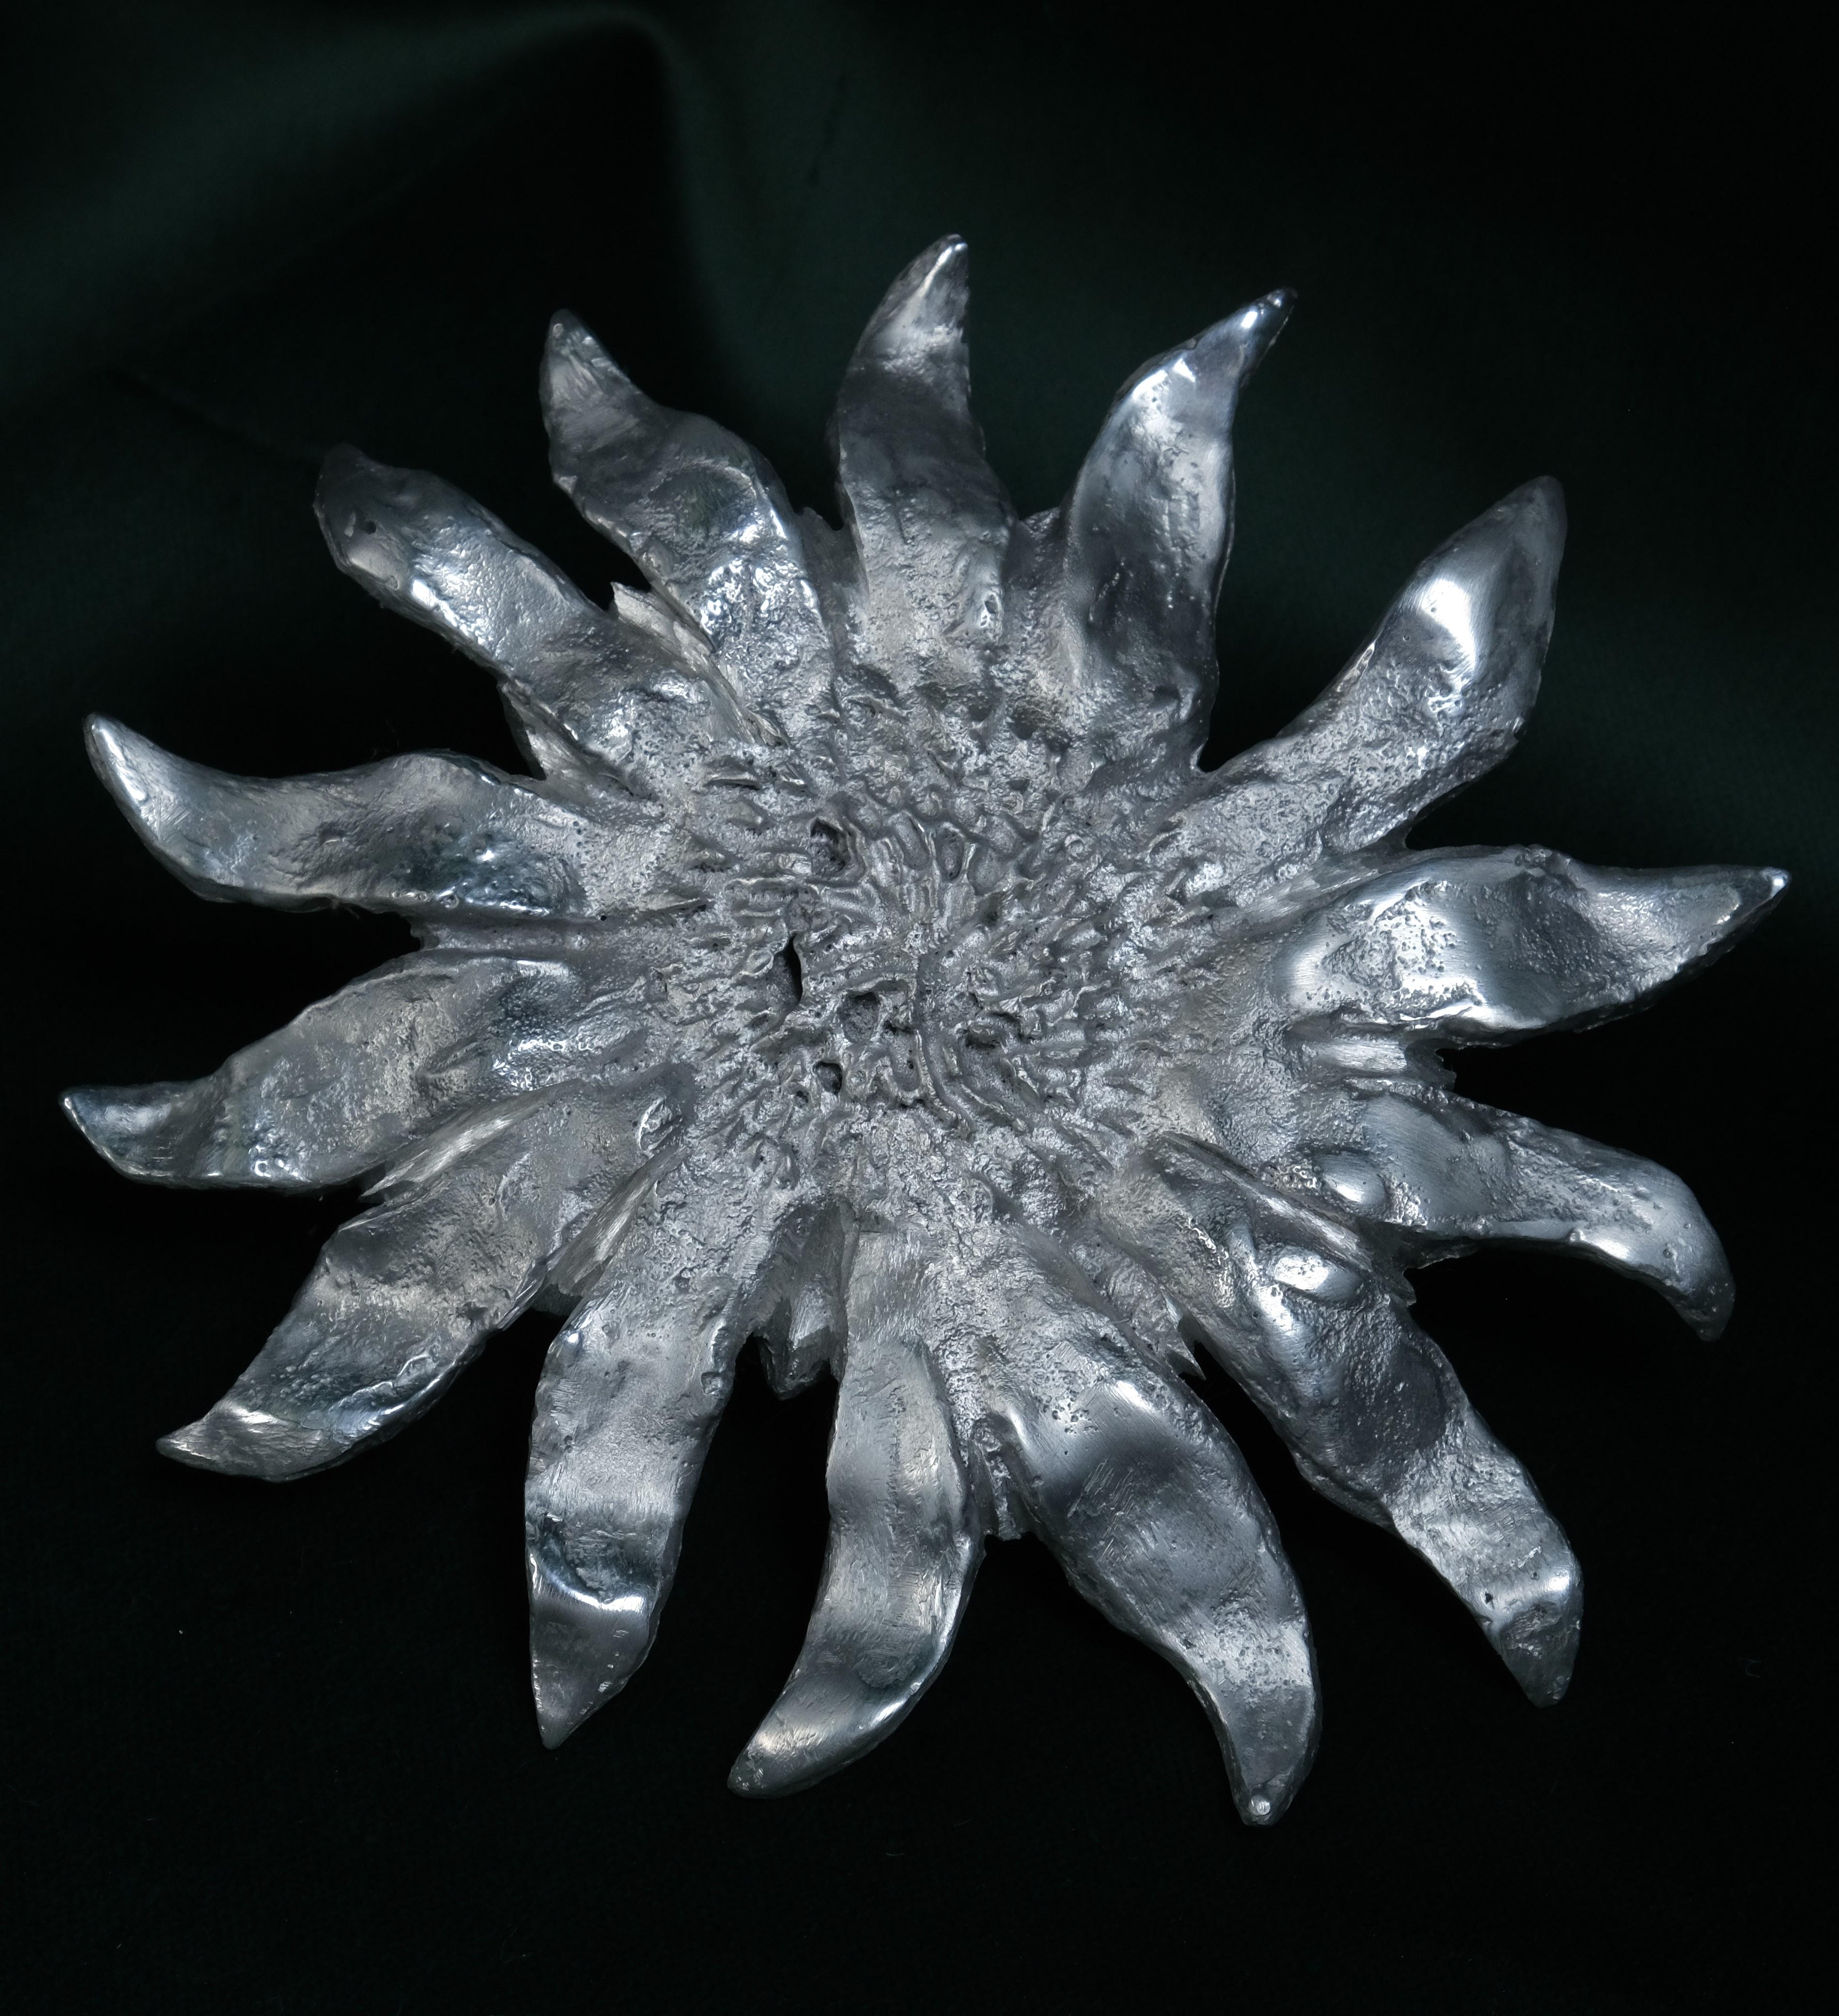 Aluminium sunflower, 1st version made as a ring, or accessories and developped further as a wall sculpture.

From the series 